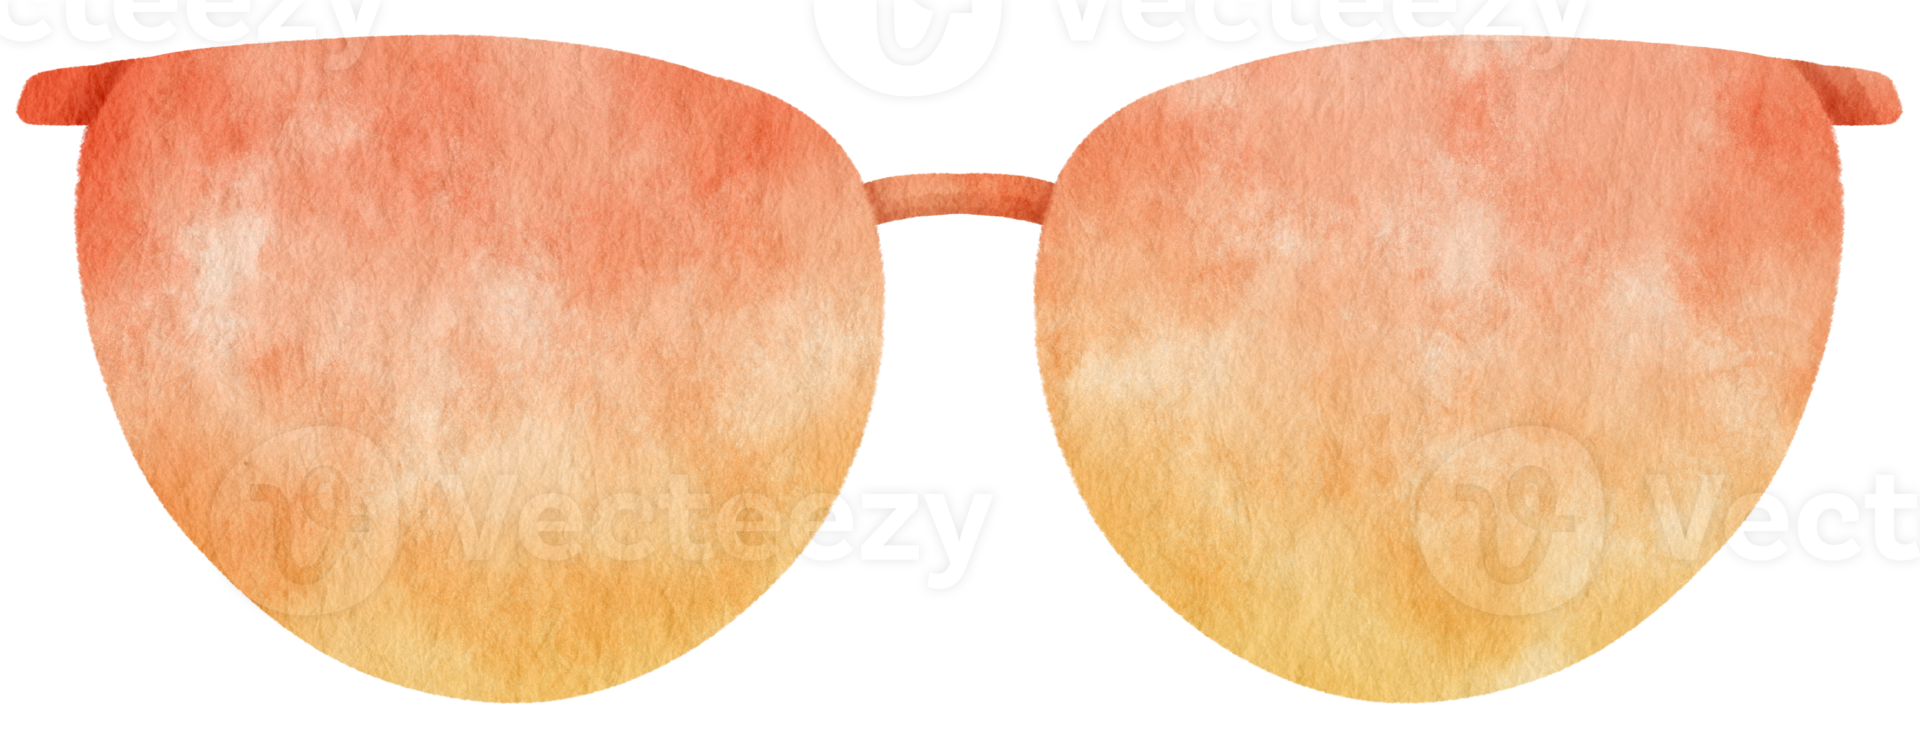 Orange Sunglasses in watercolor Summer fashion item Element png